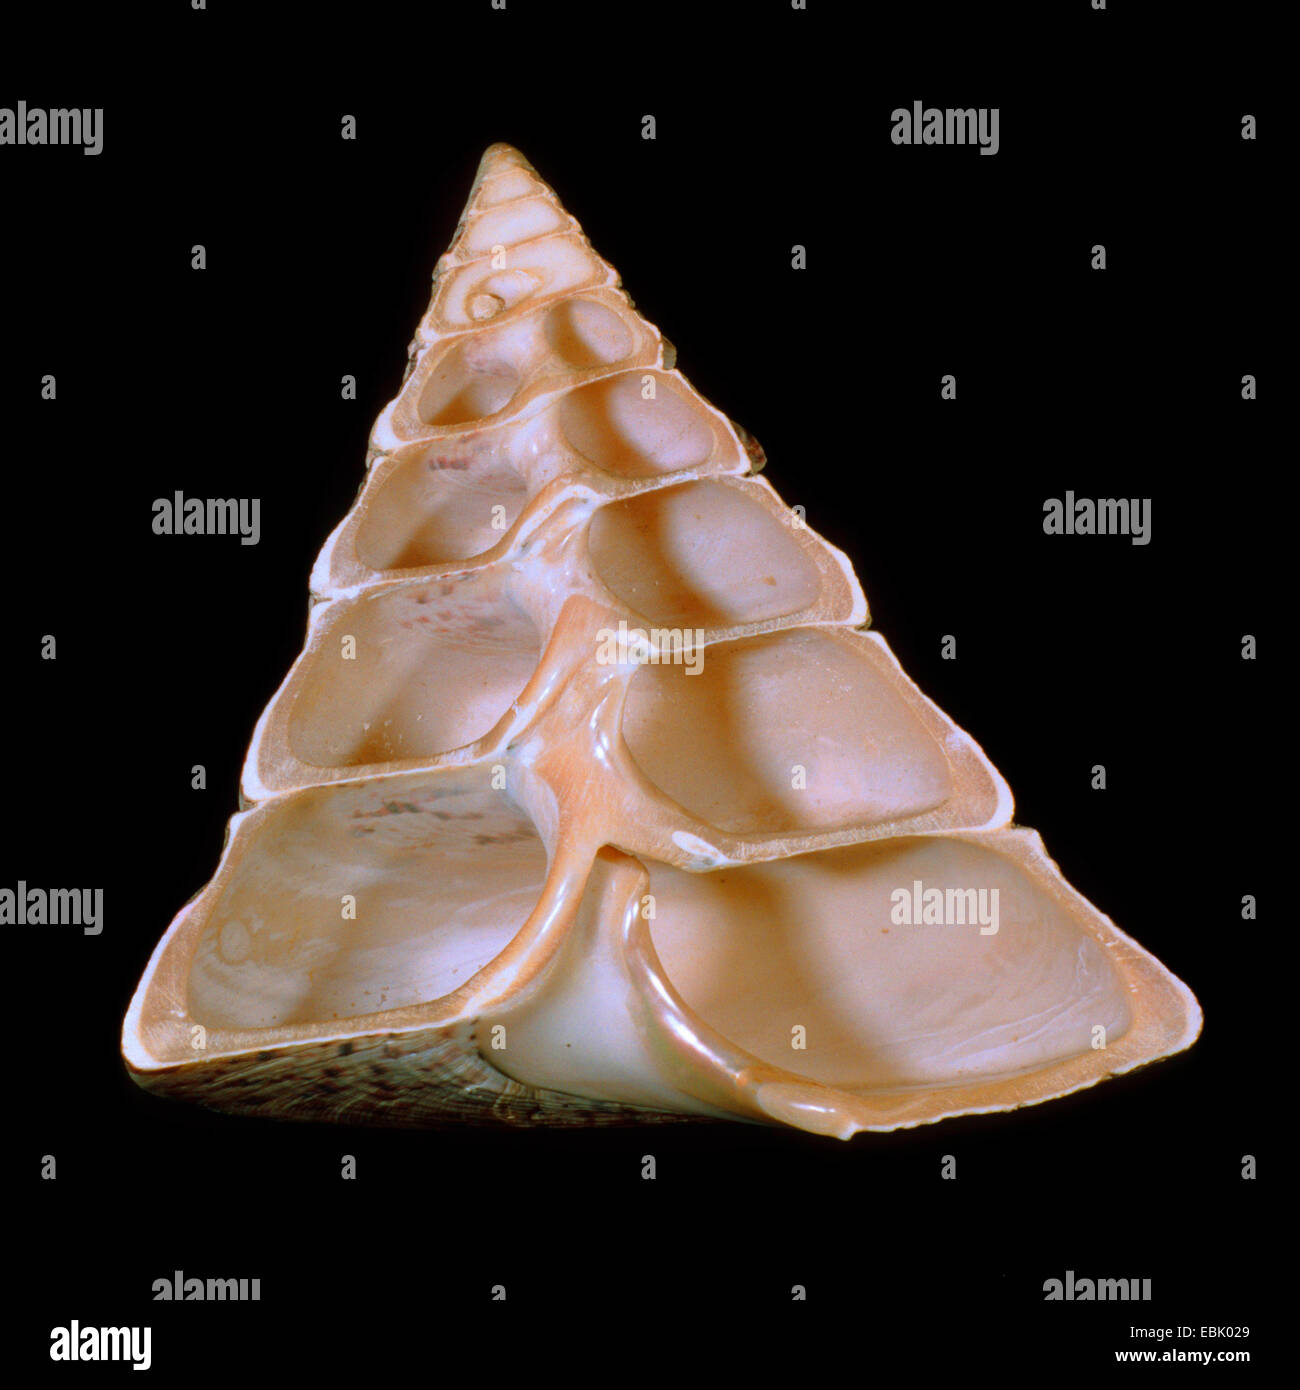 Nile topsnail, Nile trochus, commercial trochus, pearly top shell (Trochus niloticus) Stock Photo